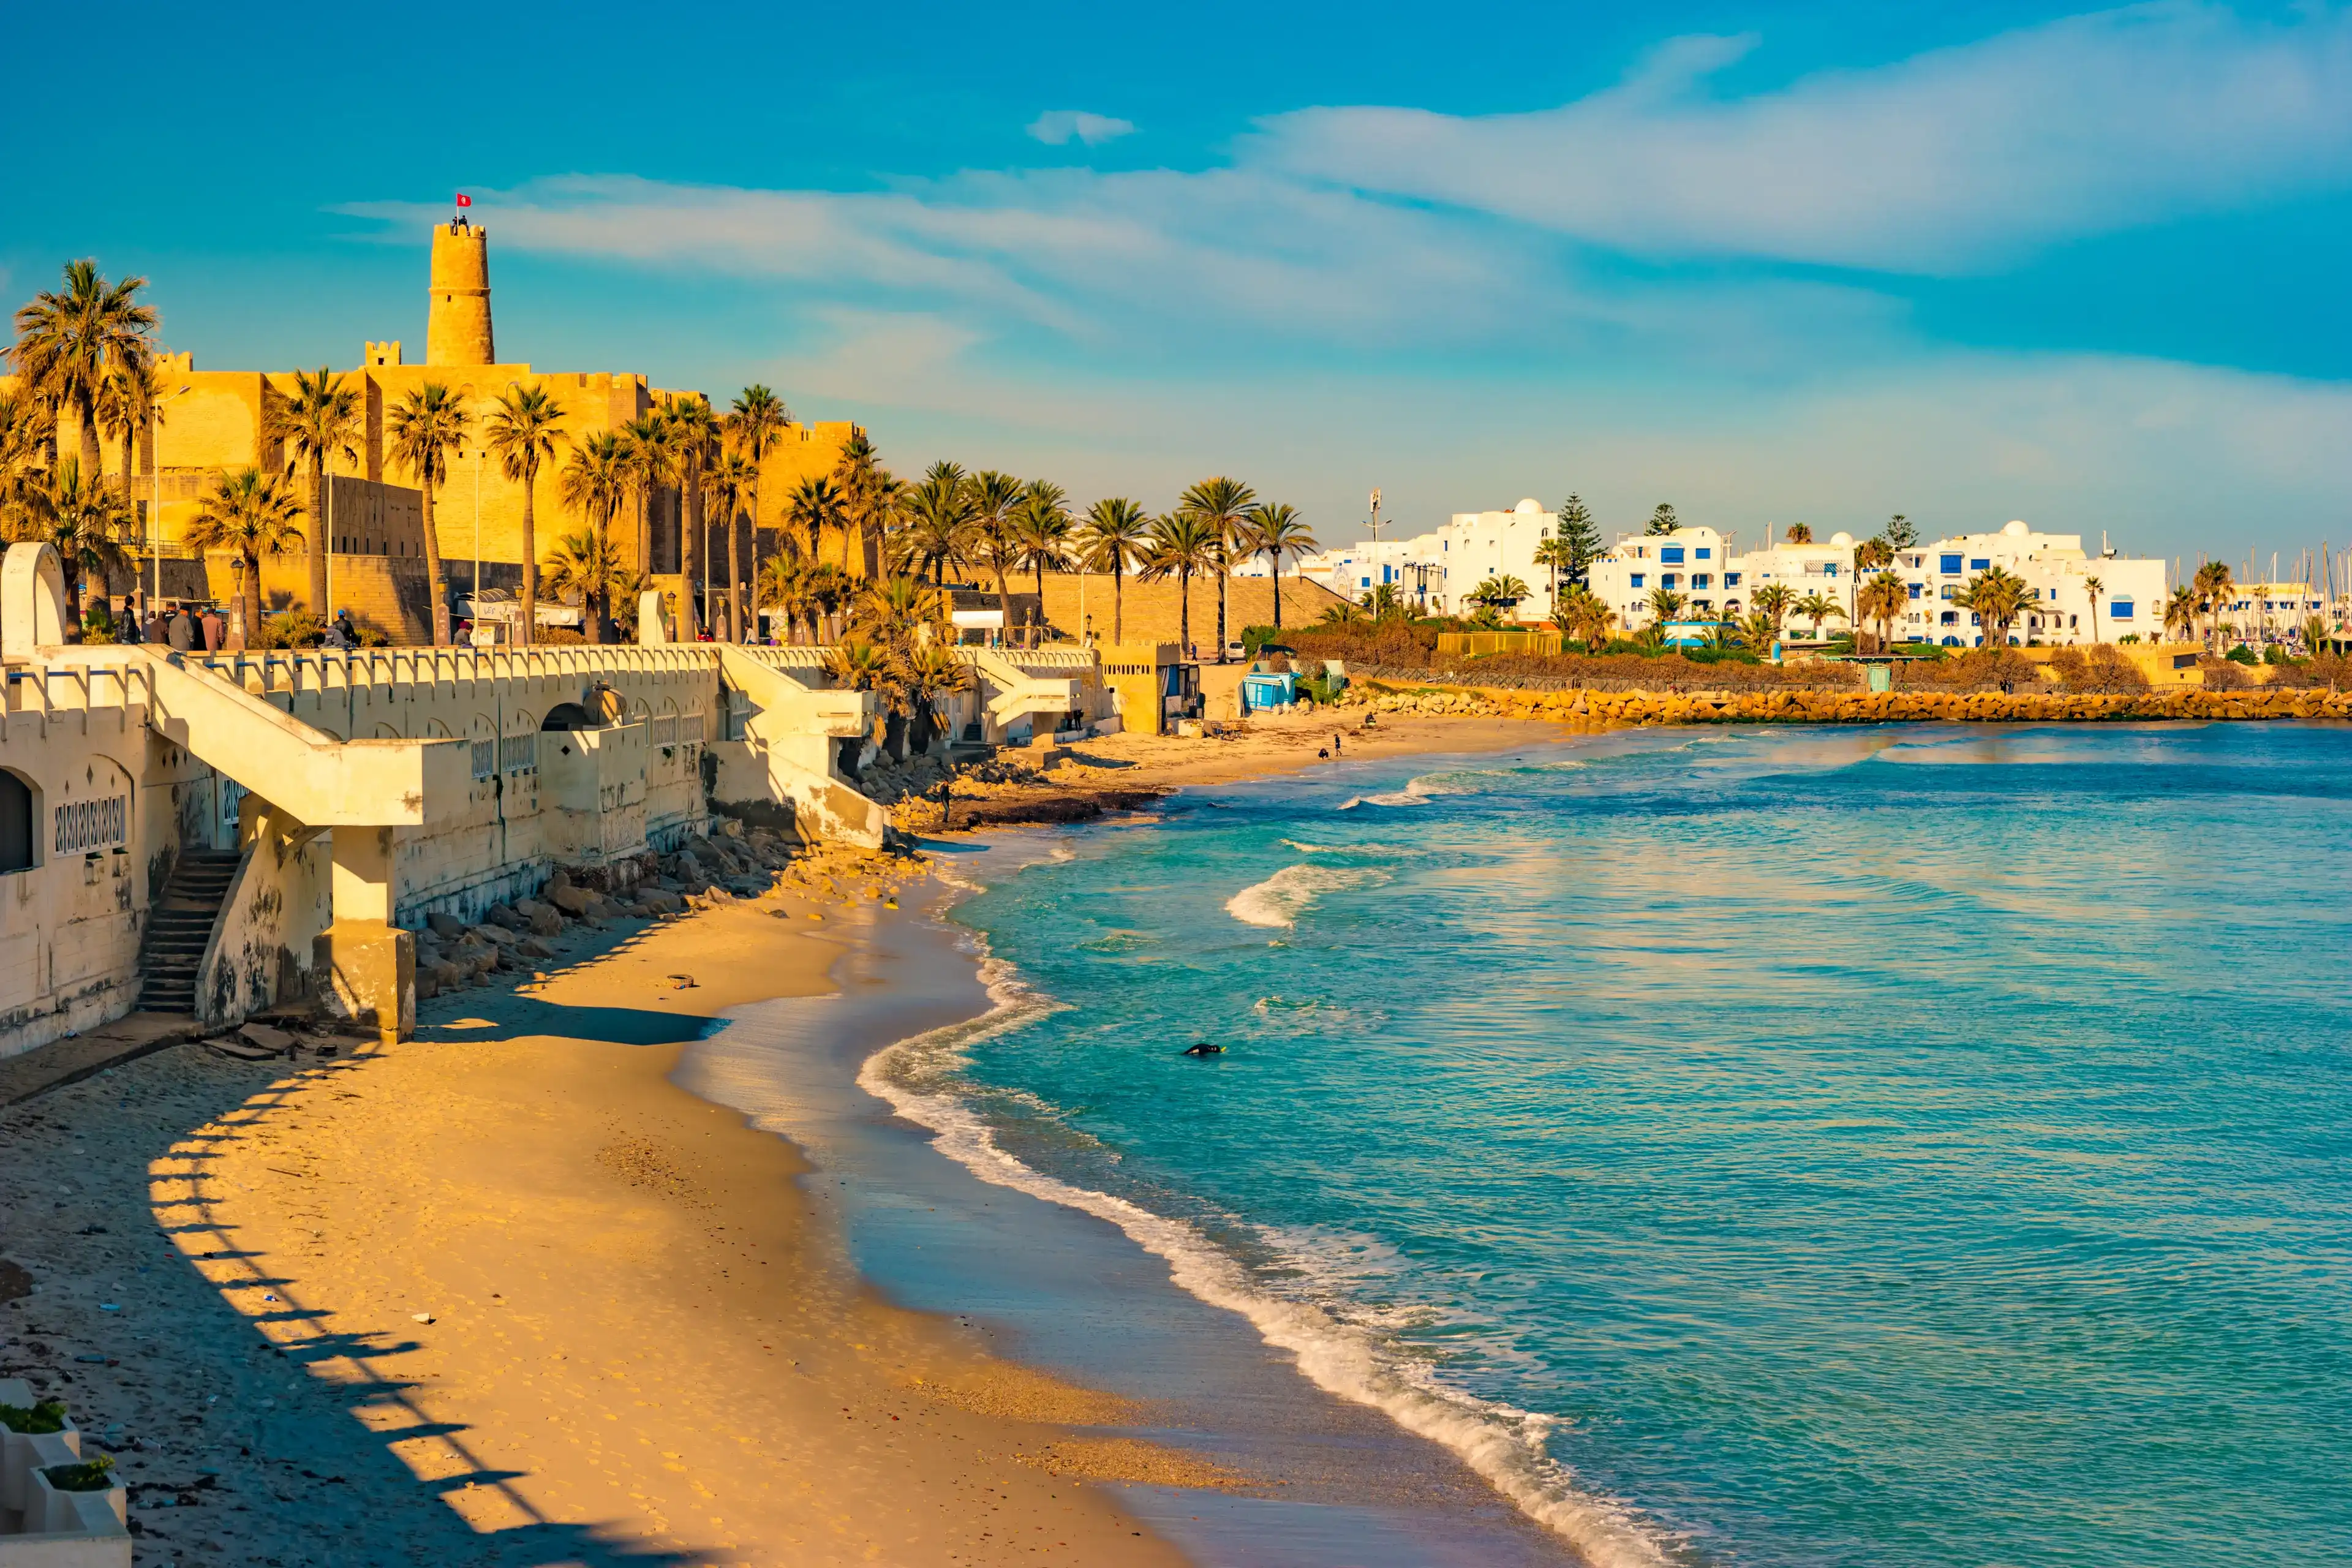 Monastir in Tunisia is an ancient city and popular tourist destination with a beach on the Mediterranean Sea.